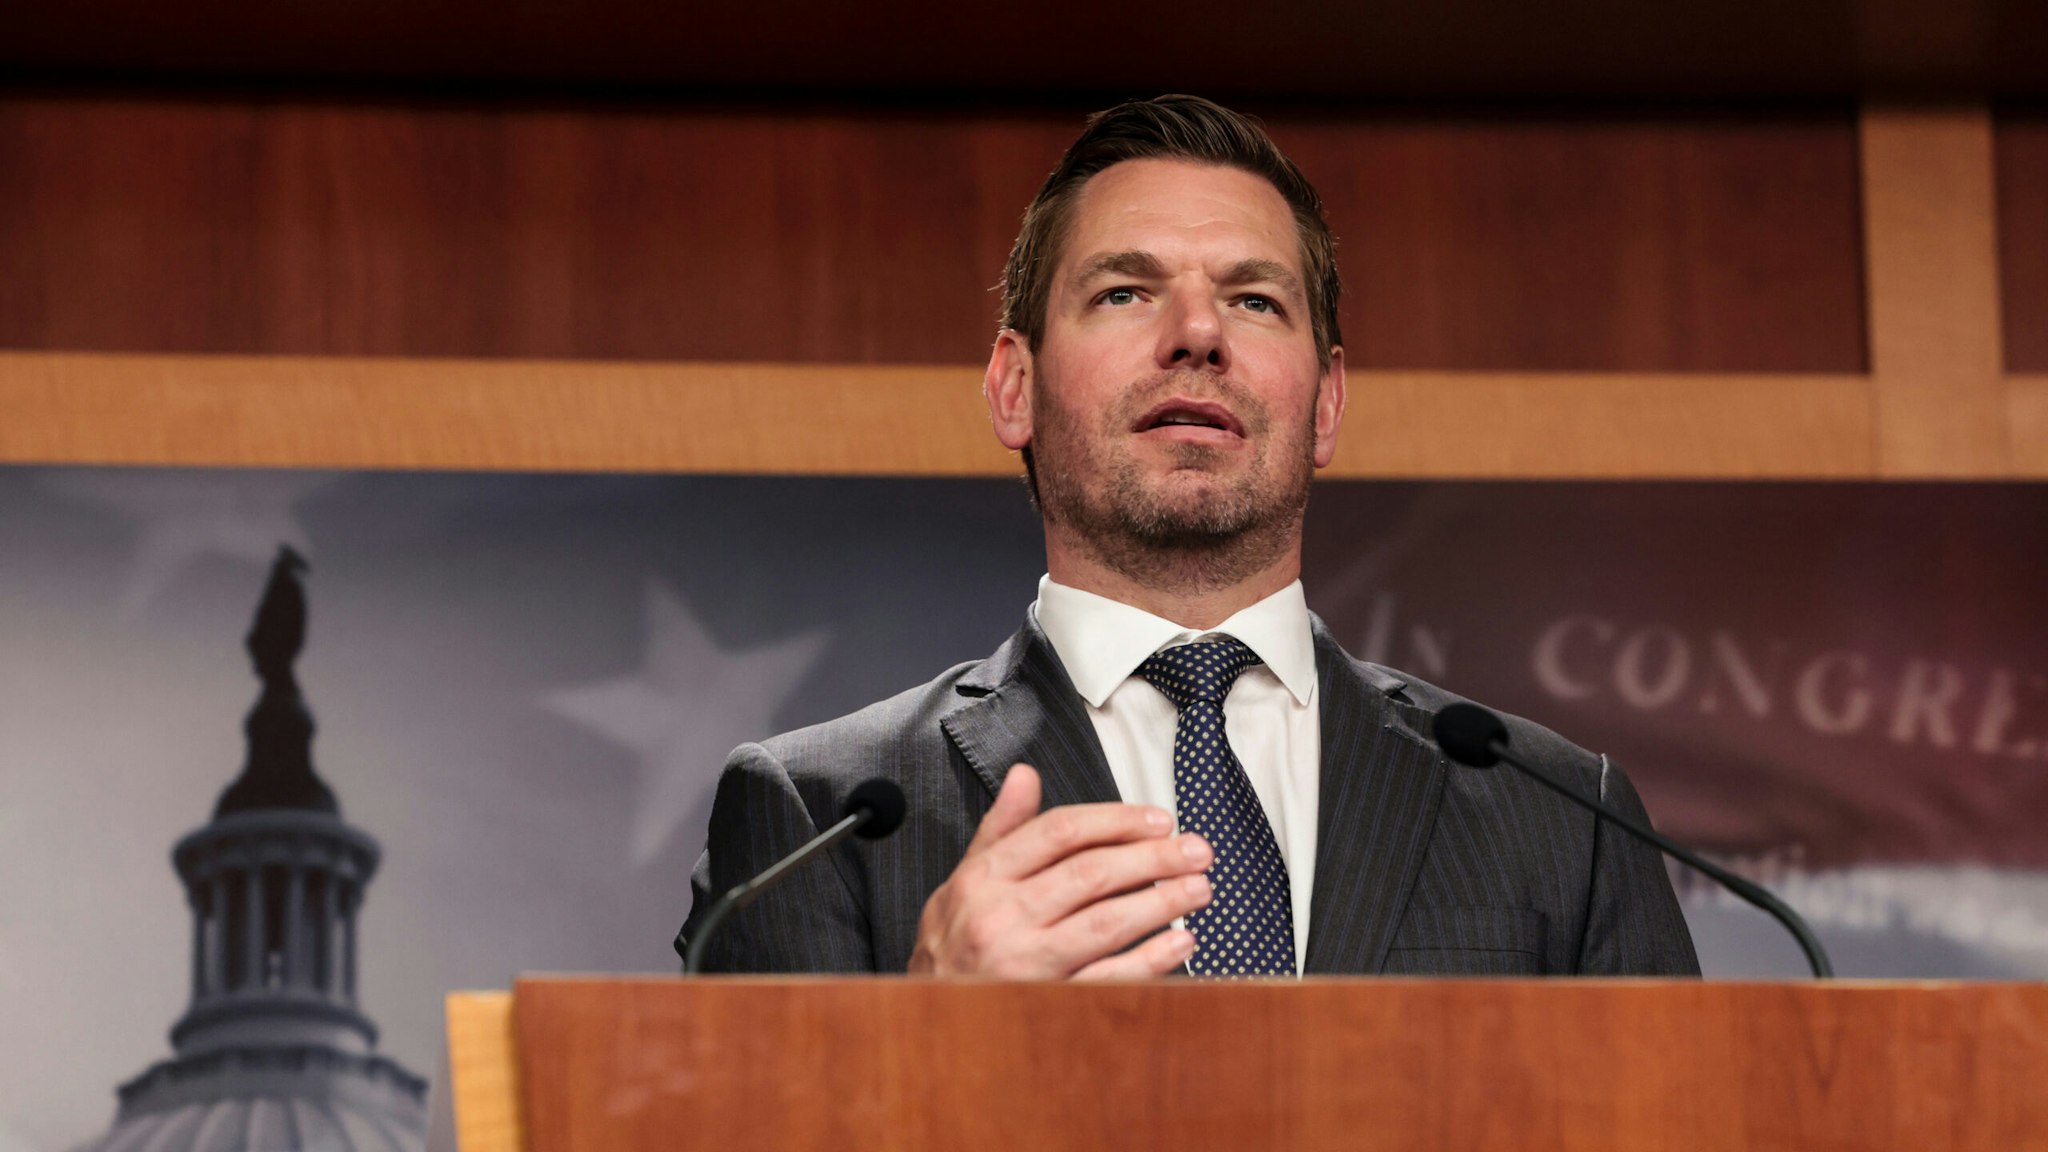 Rep. Eric Swalwell (D-CA) speaks alongside Sen. Jack Reed (D-RI) during a news conference on the introduction of their Protection from Abusive Passengers Act at the U.S. Capitol Building on April 06, 2022 in Washington, DC.